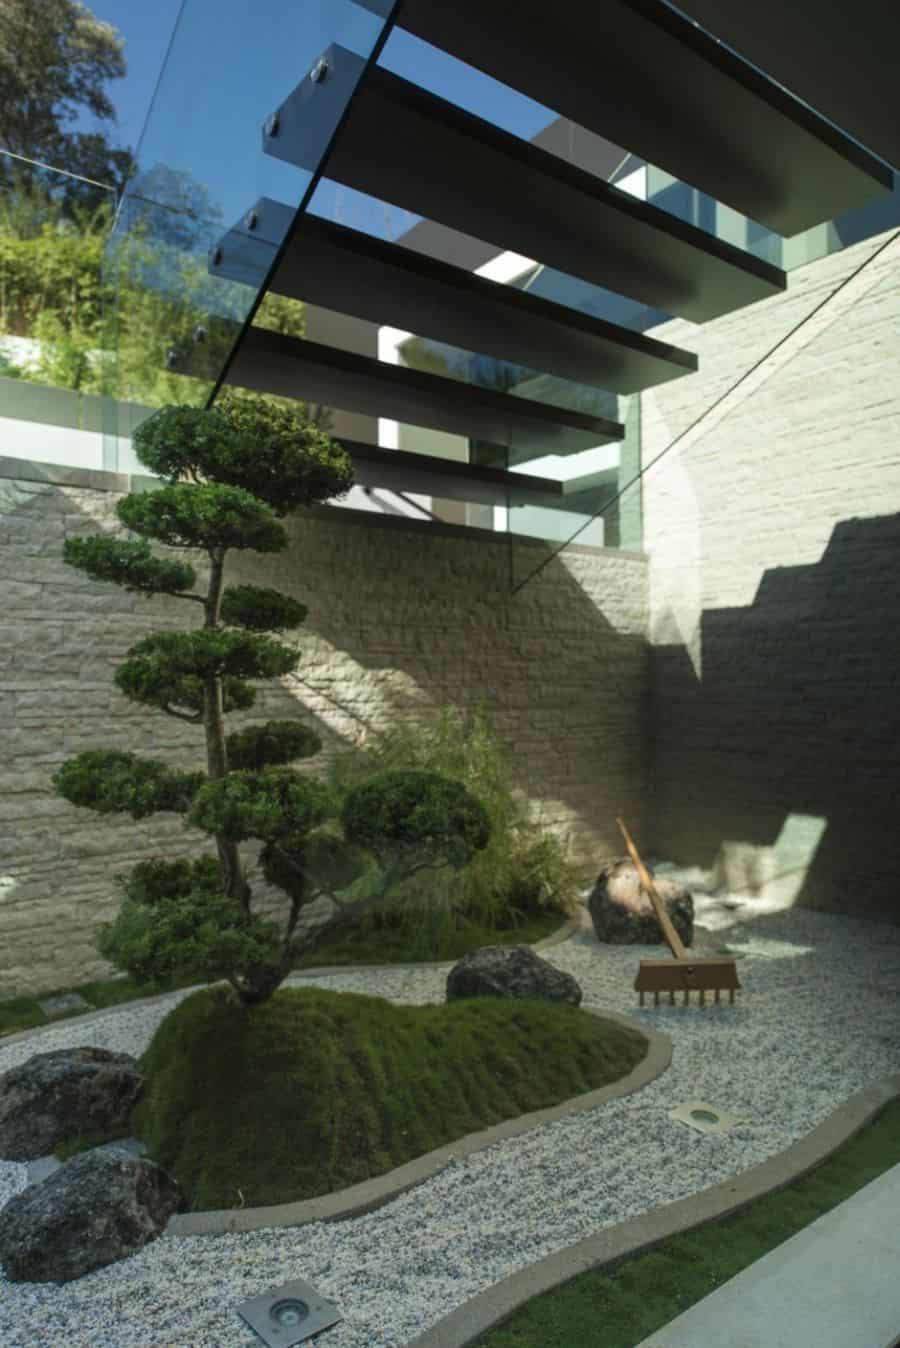 Floating staircase above an interior landscape